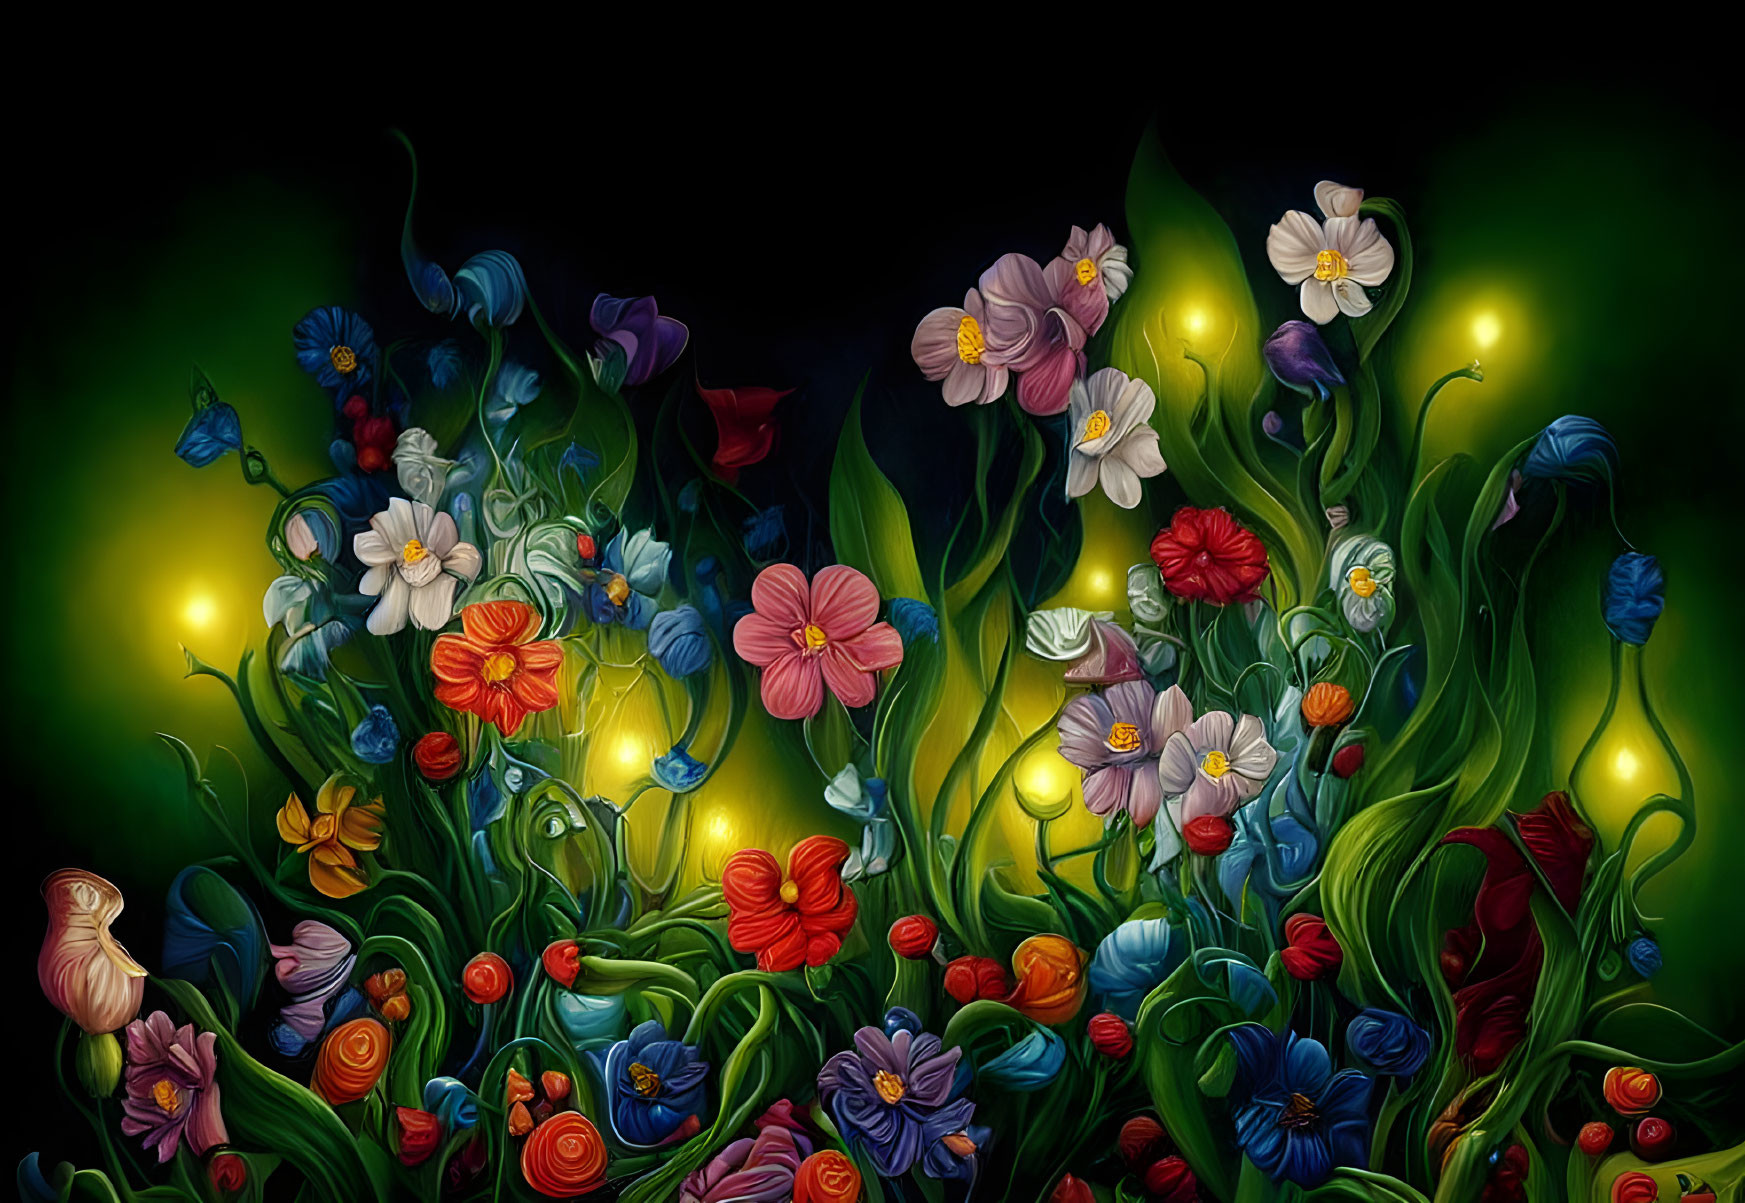 Colorful Luminescent Flowers on Dark Background with Glowing Lights